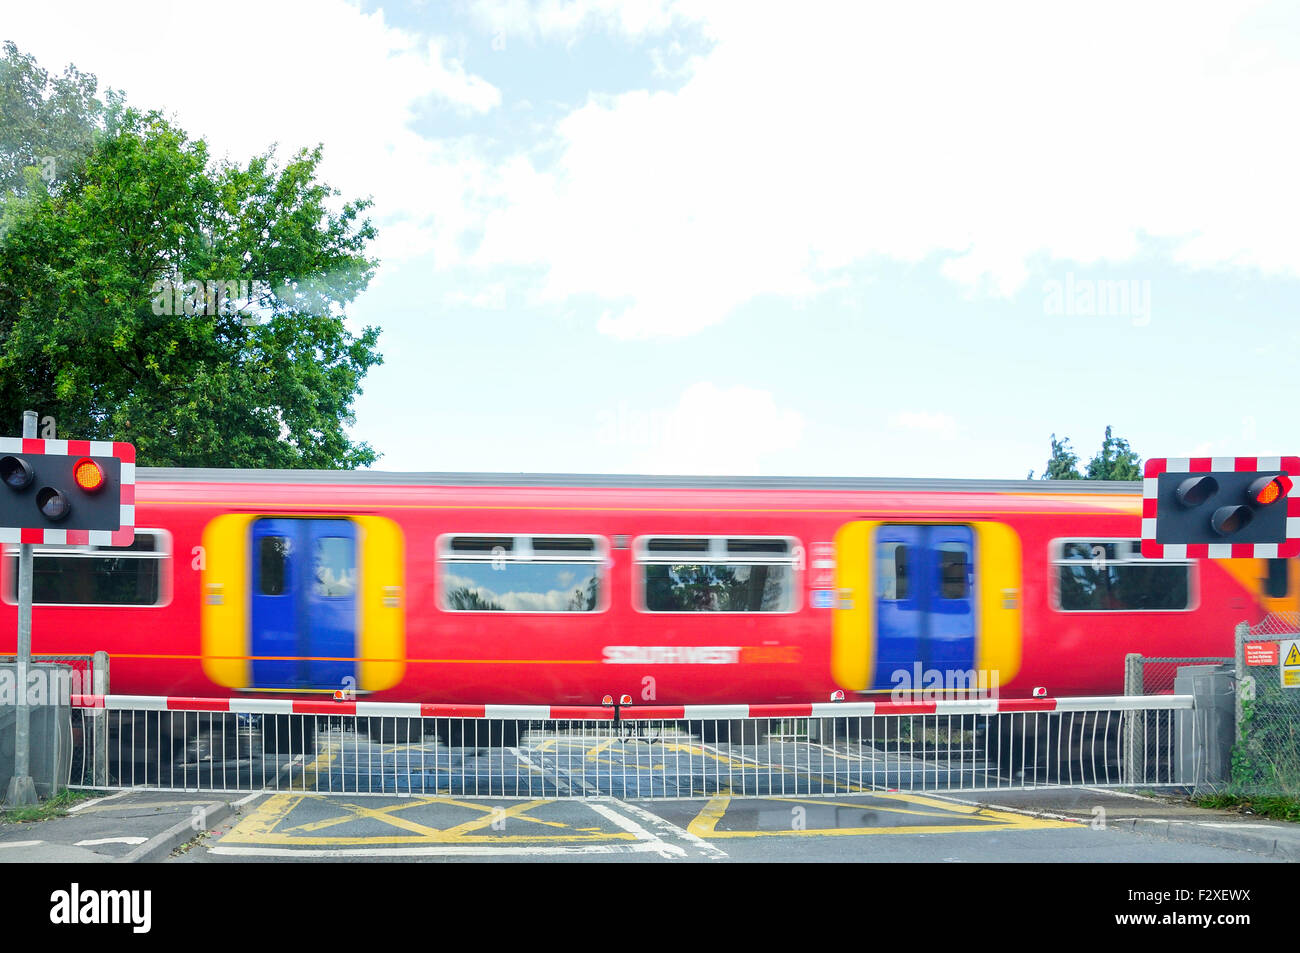 South West train street crossing, Datchet, Buckinghamshire, Angleterre, Royaume-Uni Banque D'Images